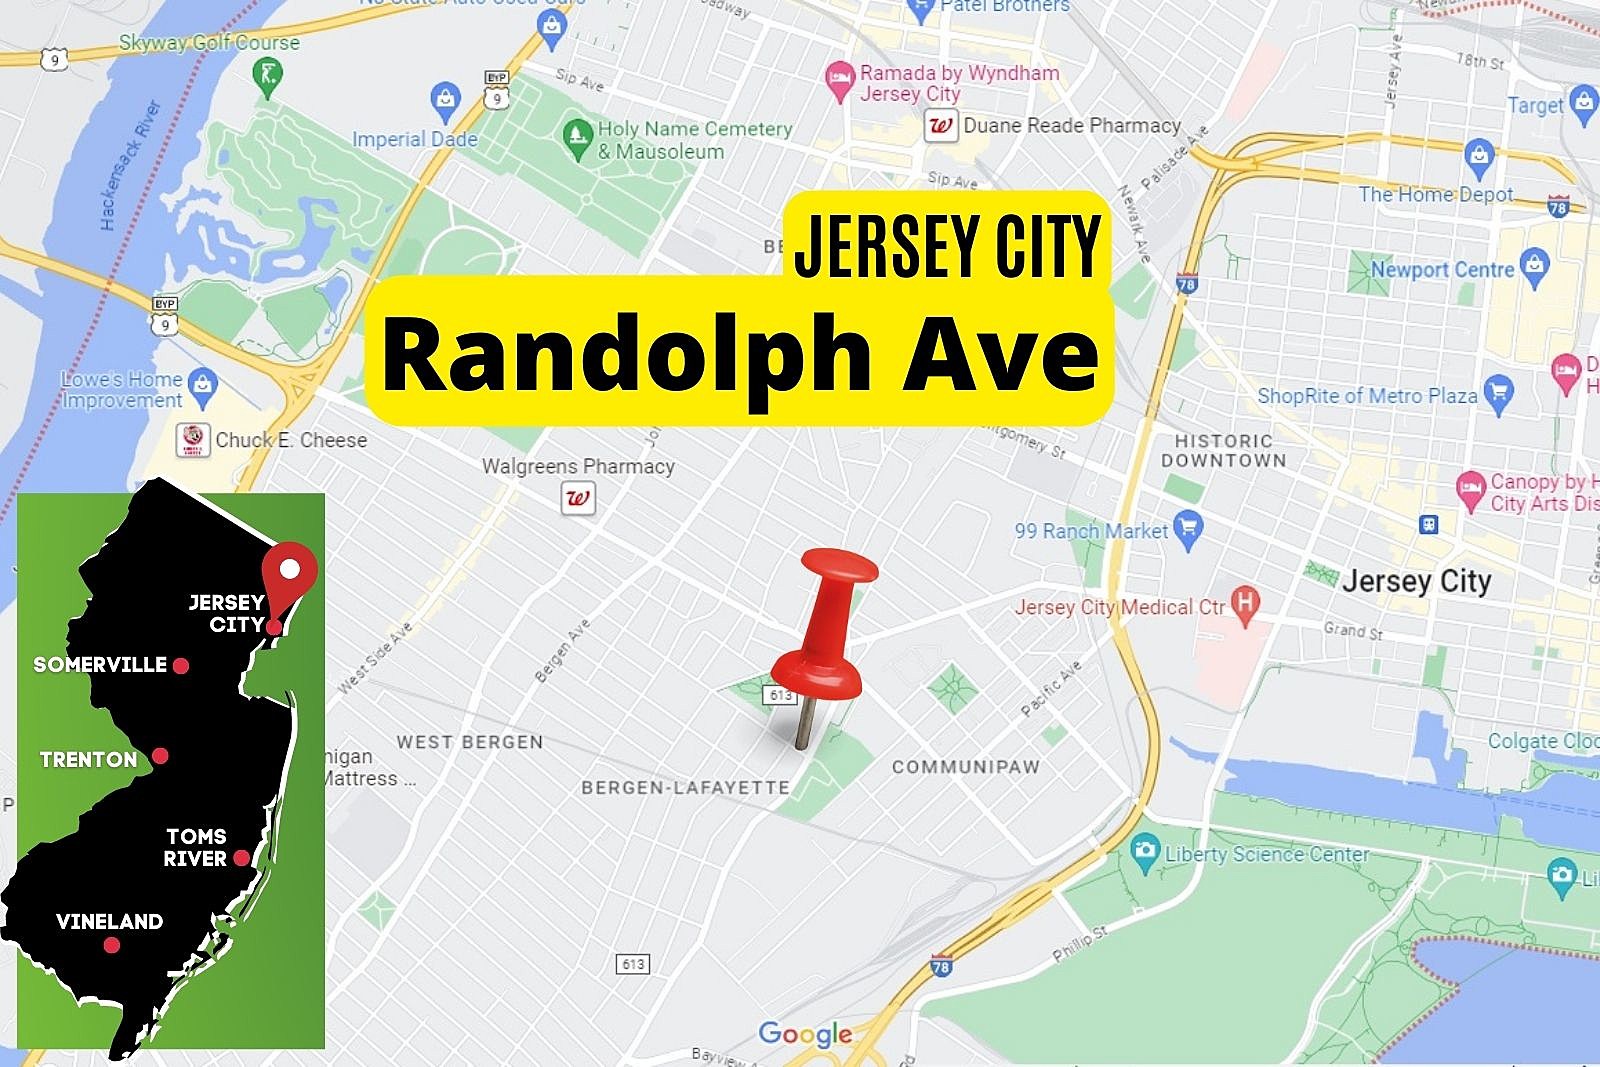 Map showing Randolph Ave in Jersey City